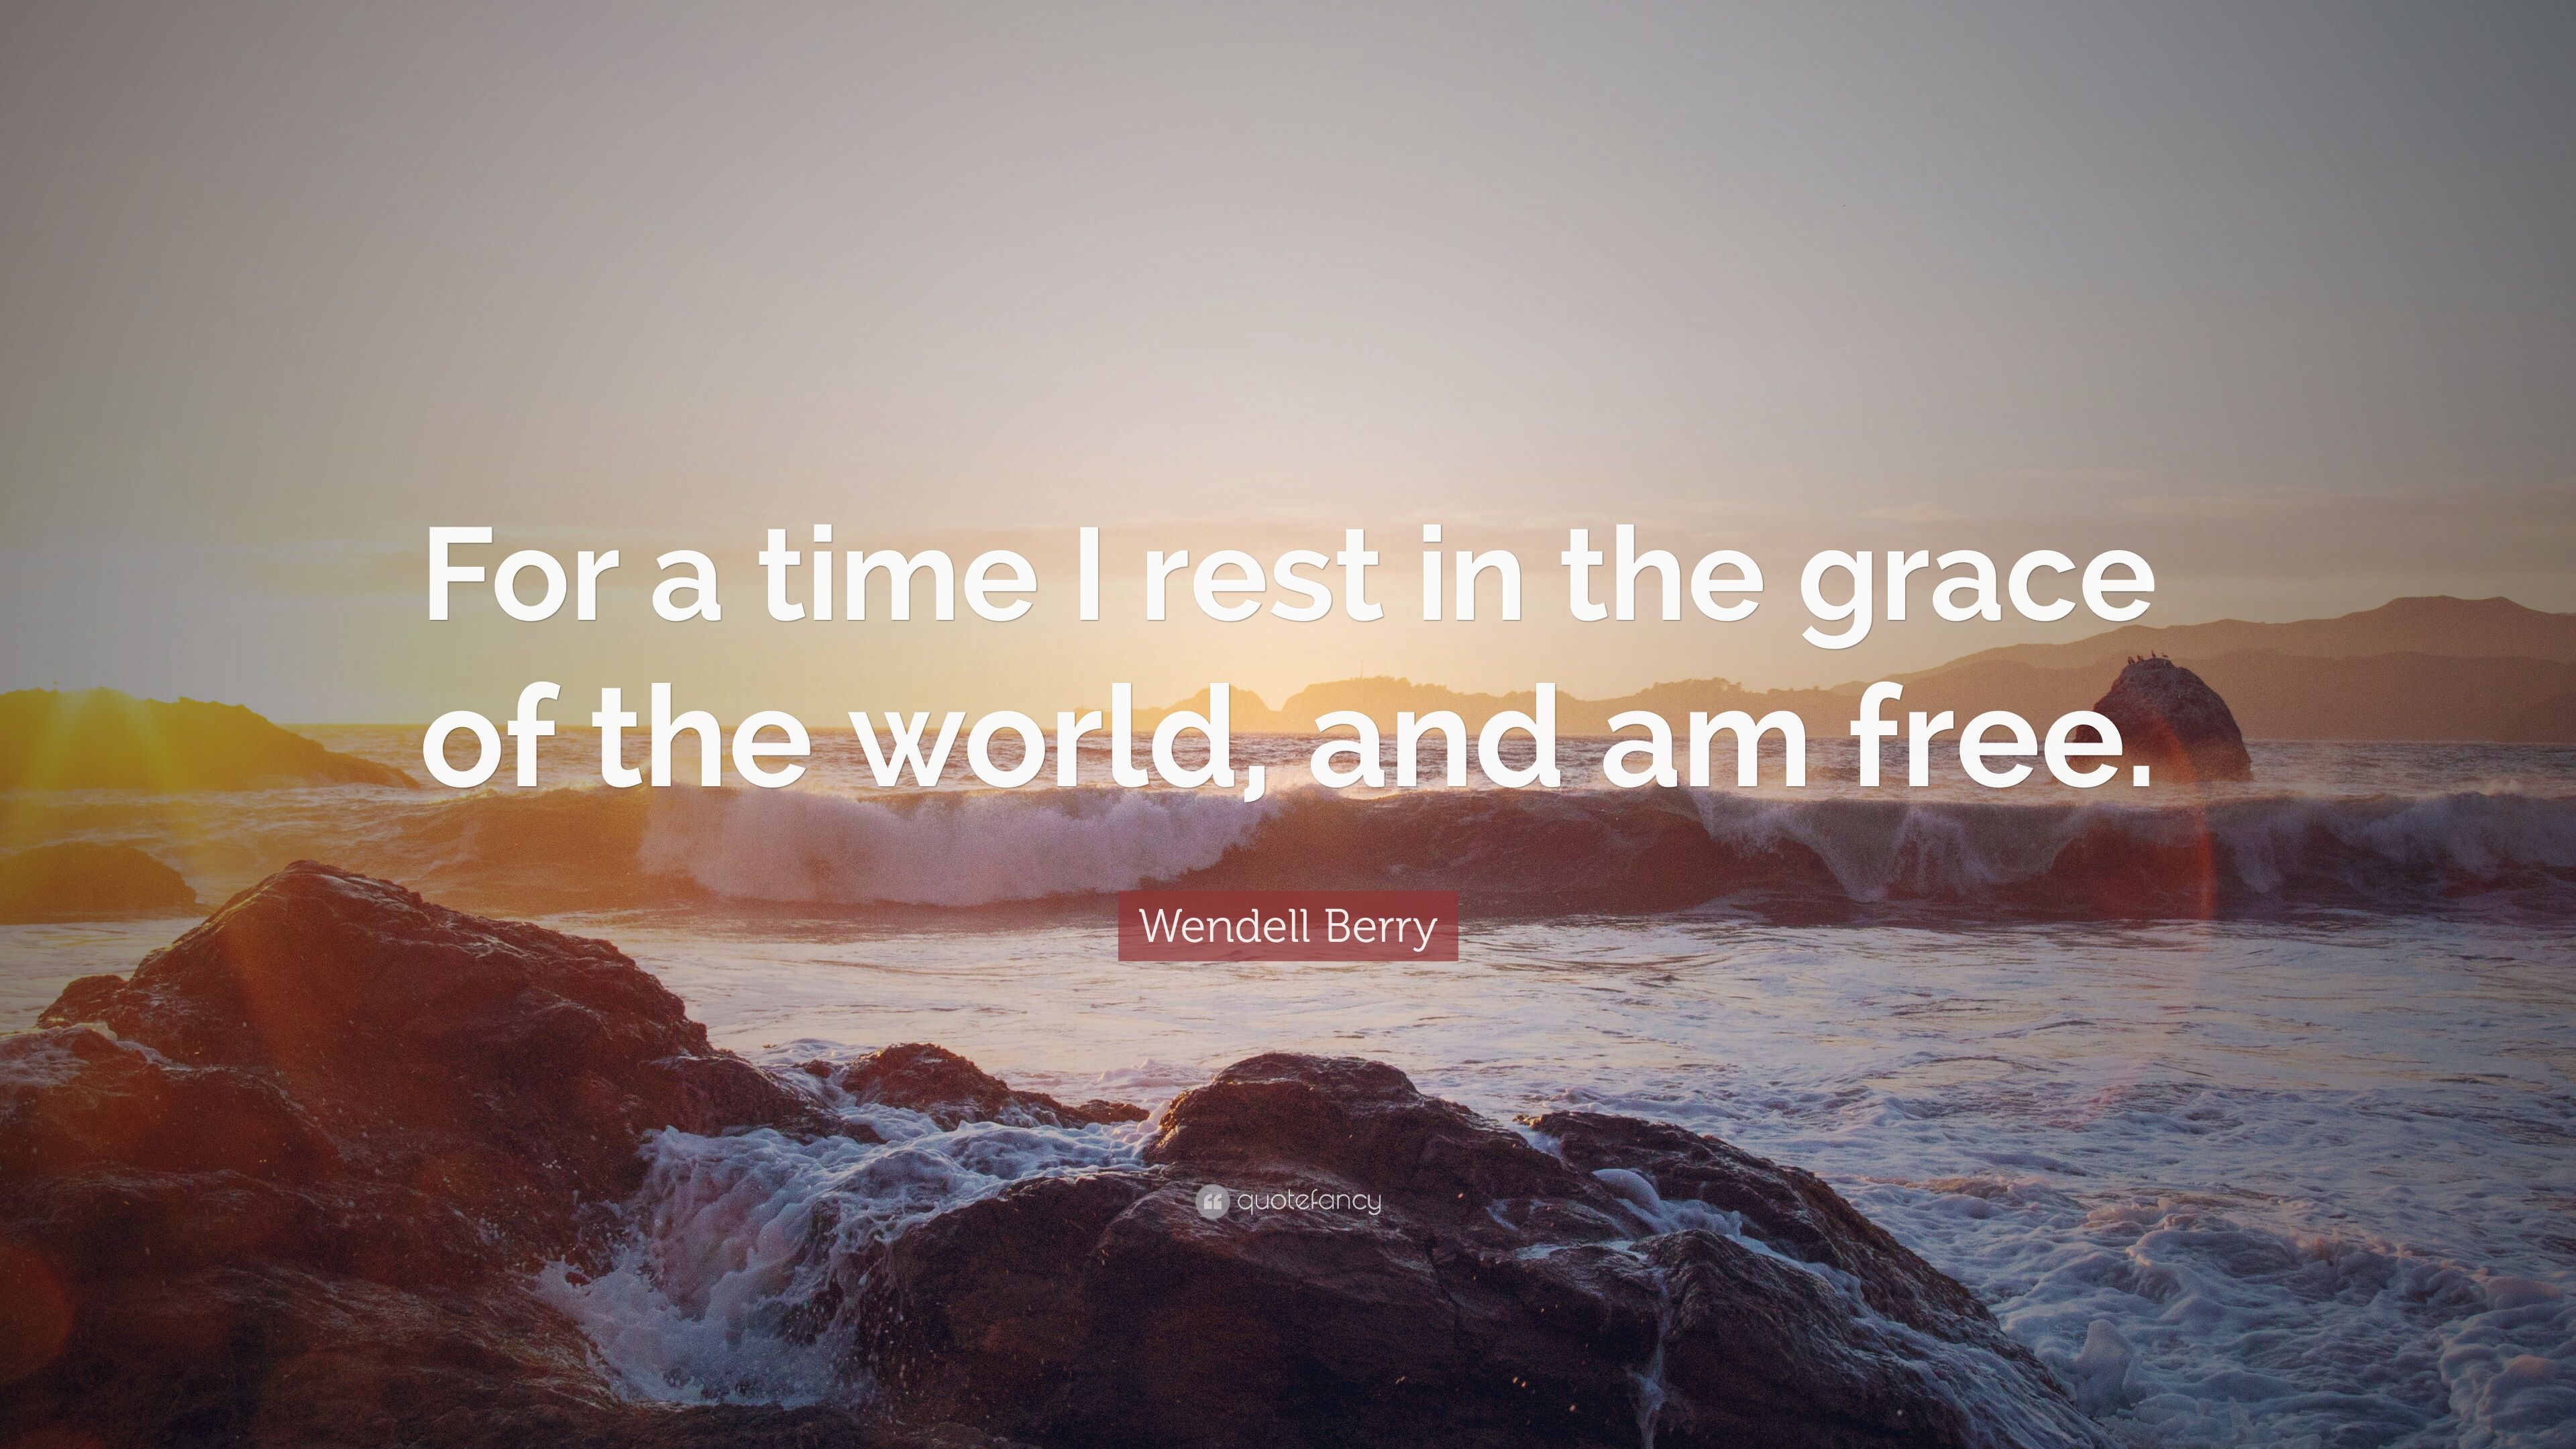 Wendell Berry Quote: “For a time I rest in the grace of the world, and am free.” (10 wallpaper)